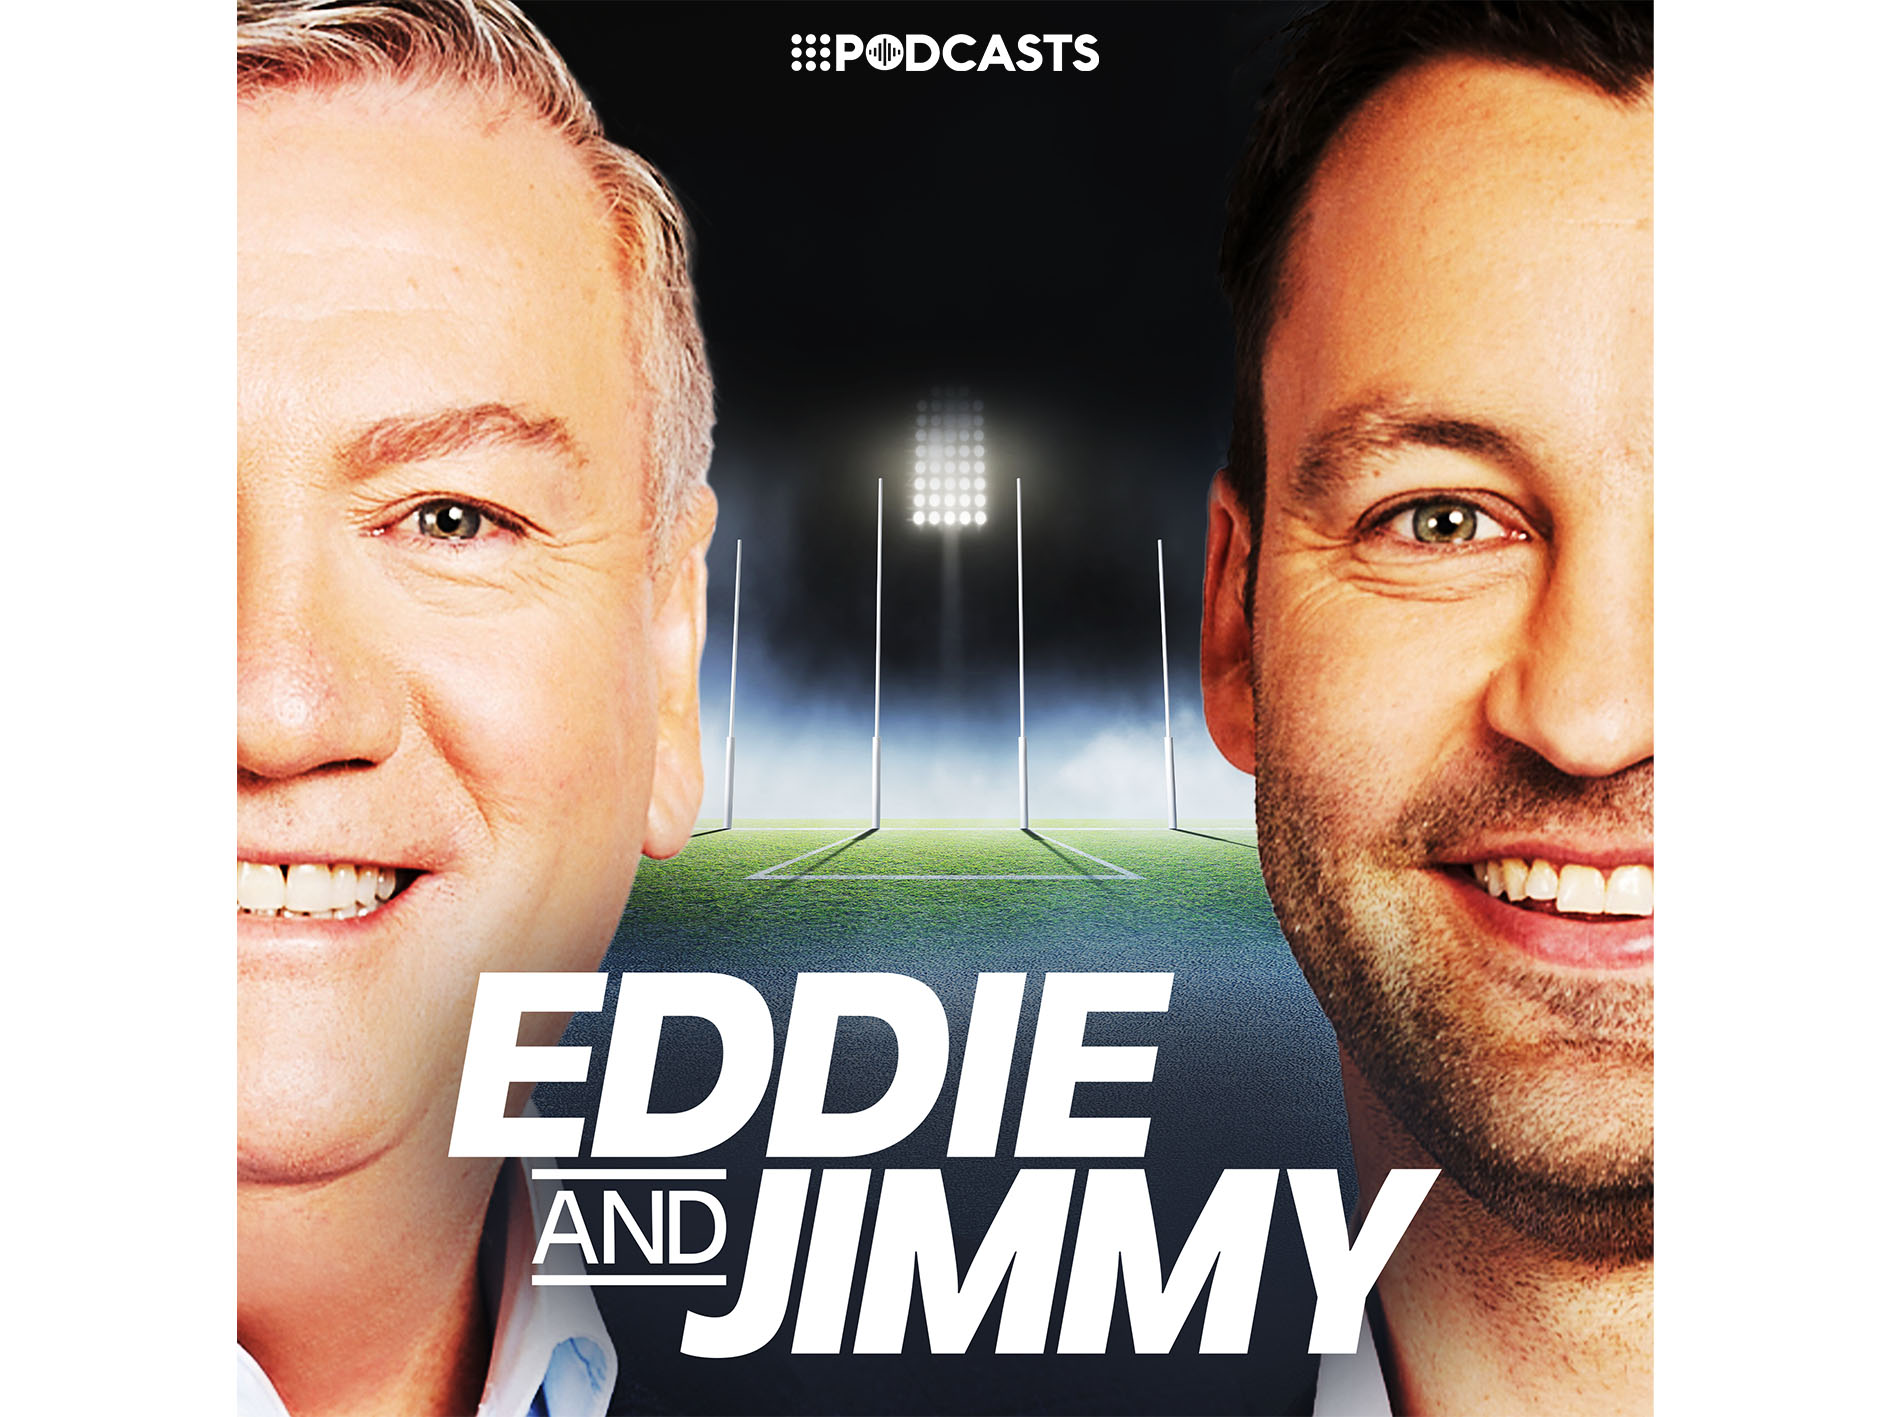 Footy too expensive? Eddie and Jimmy's solution: IN OR OUT?